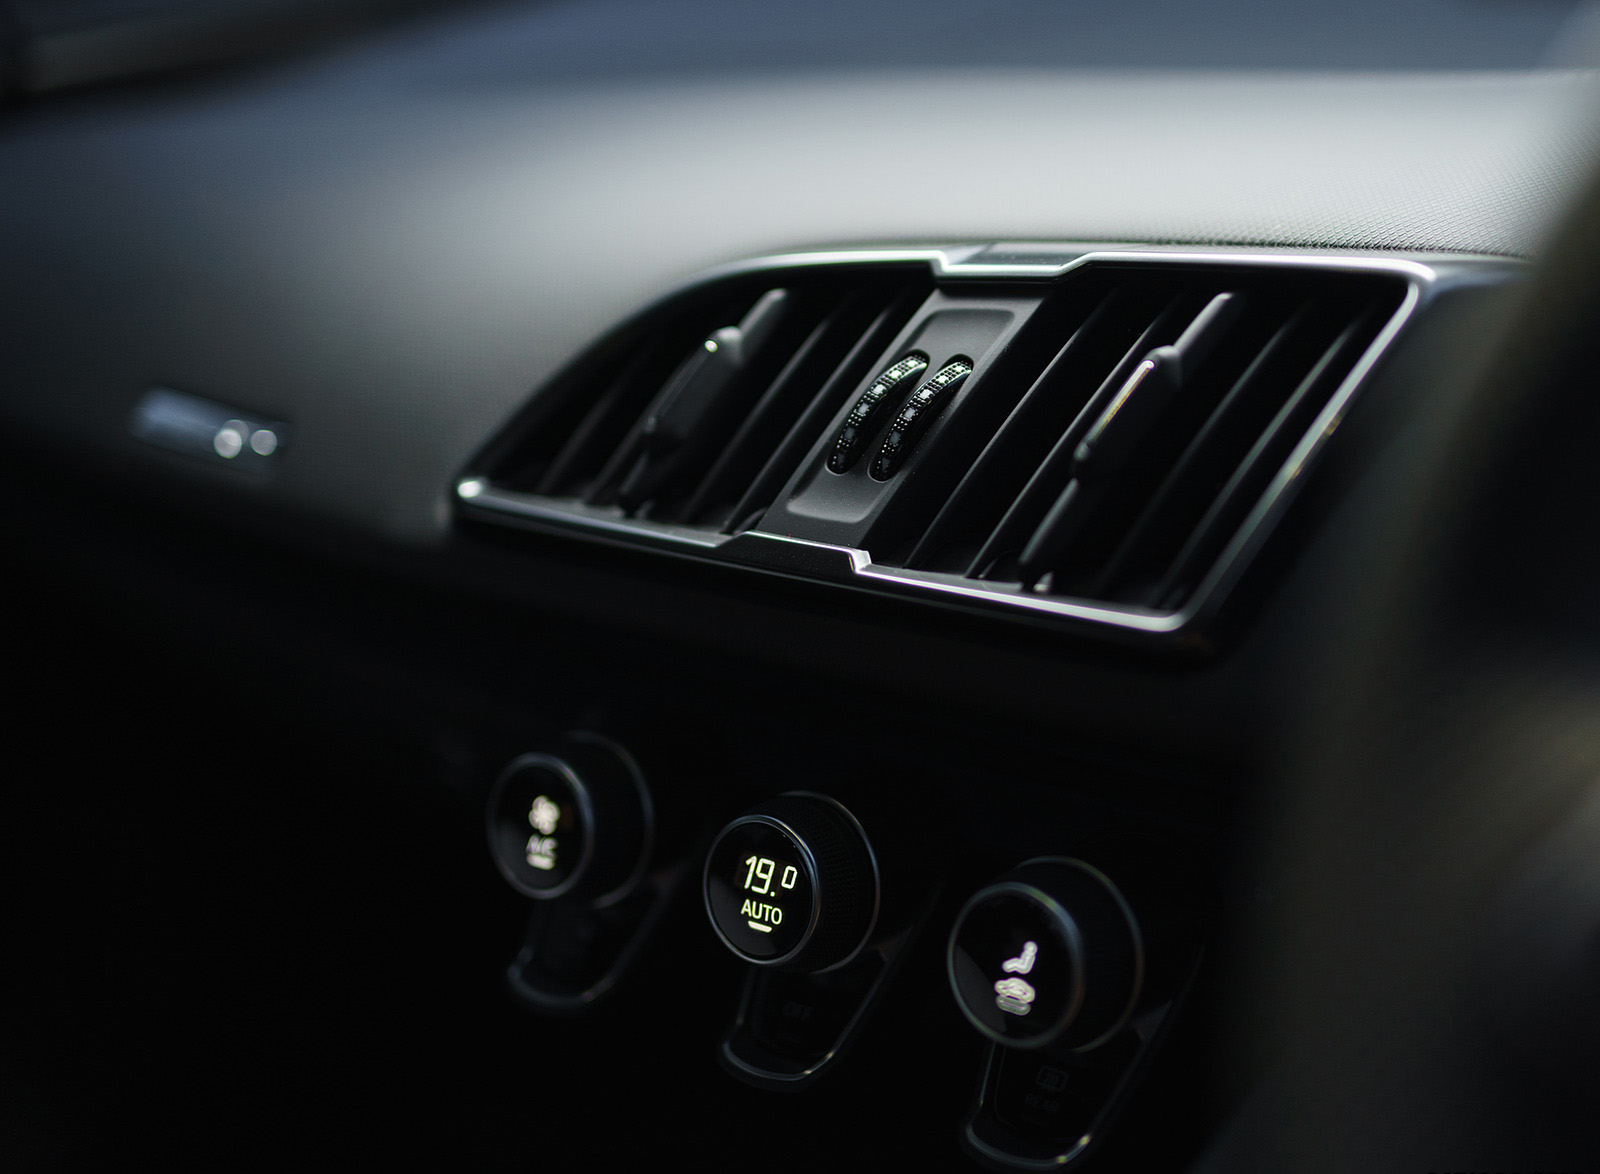 2020 Audi R8 V10 RWD Coupe (UK-Spec) Interior Detail Wallpapers #142 of 151